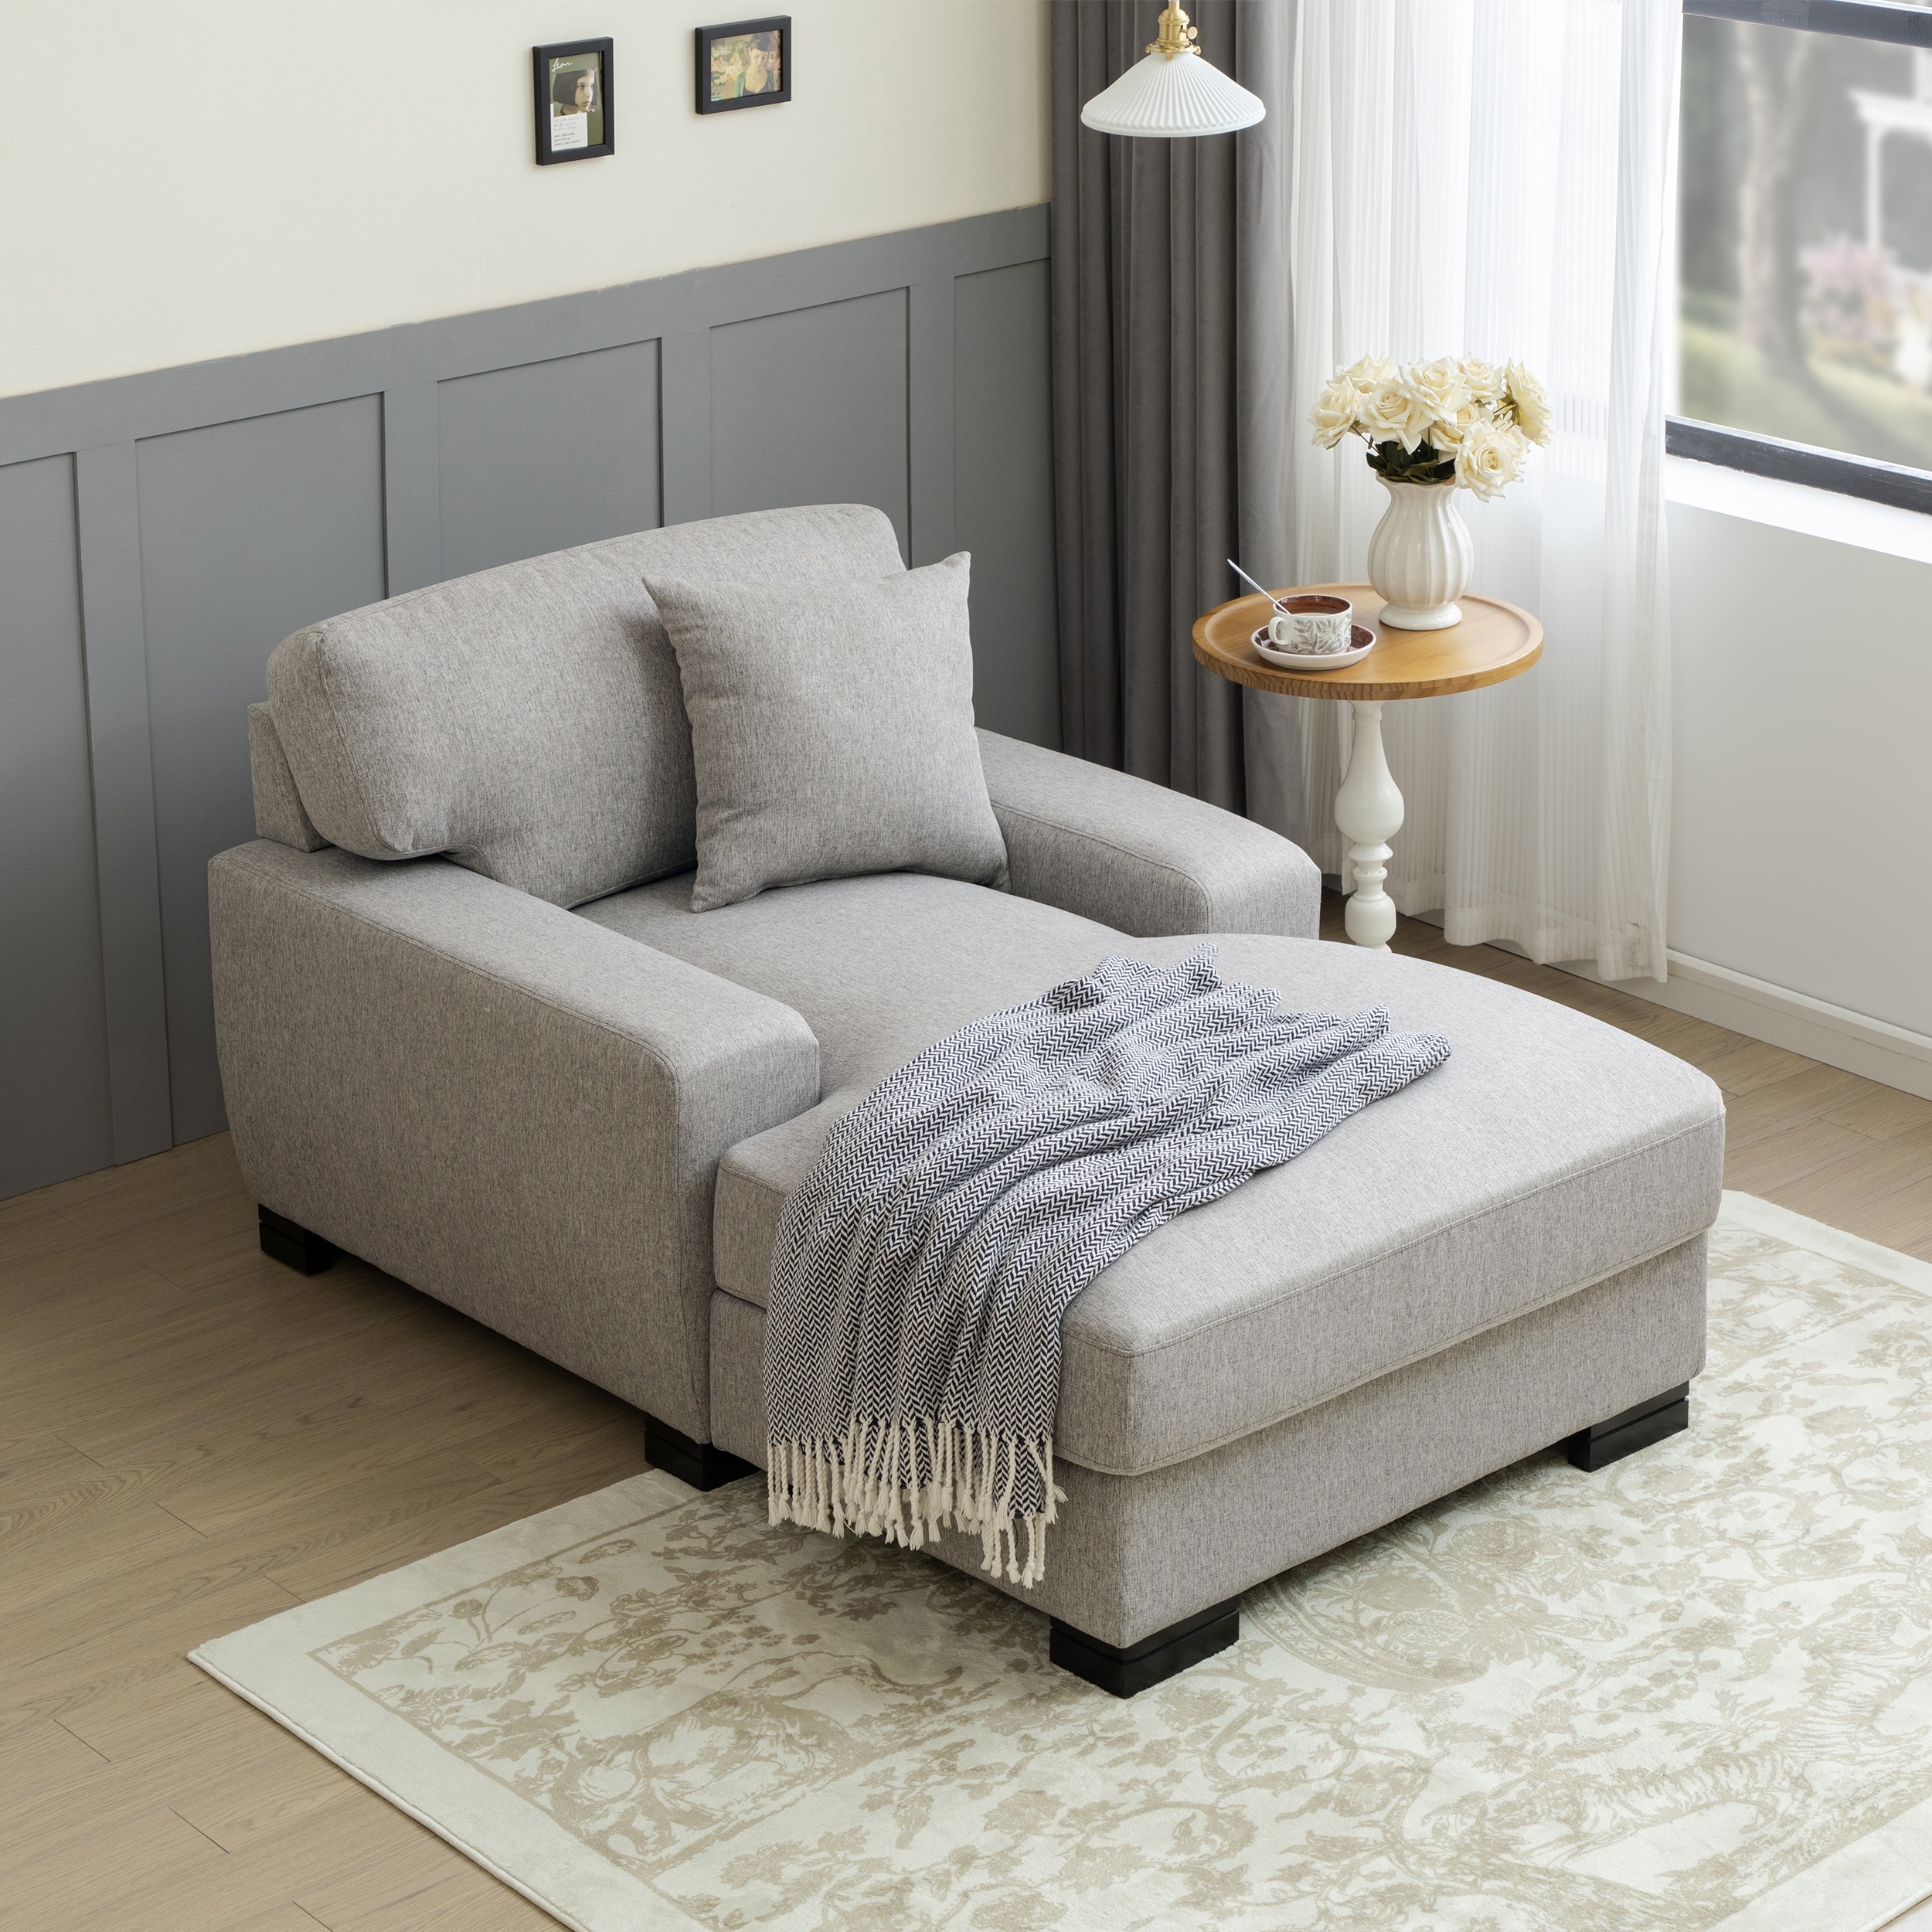 https://ak1.ostkcdn.com/images/products/is/images/direct/3e590ab3713bbc15e97ecc9147d580b94f3ba6f4/Gray-Linen-Chaise-Lounges-Removable-Cushions-Recliner-Chairs-Accent-Chairs.jpg